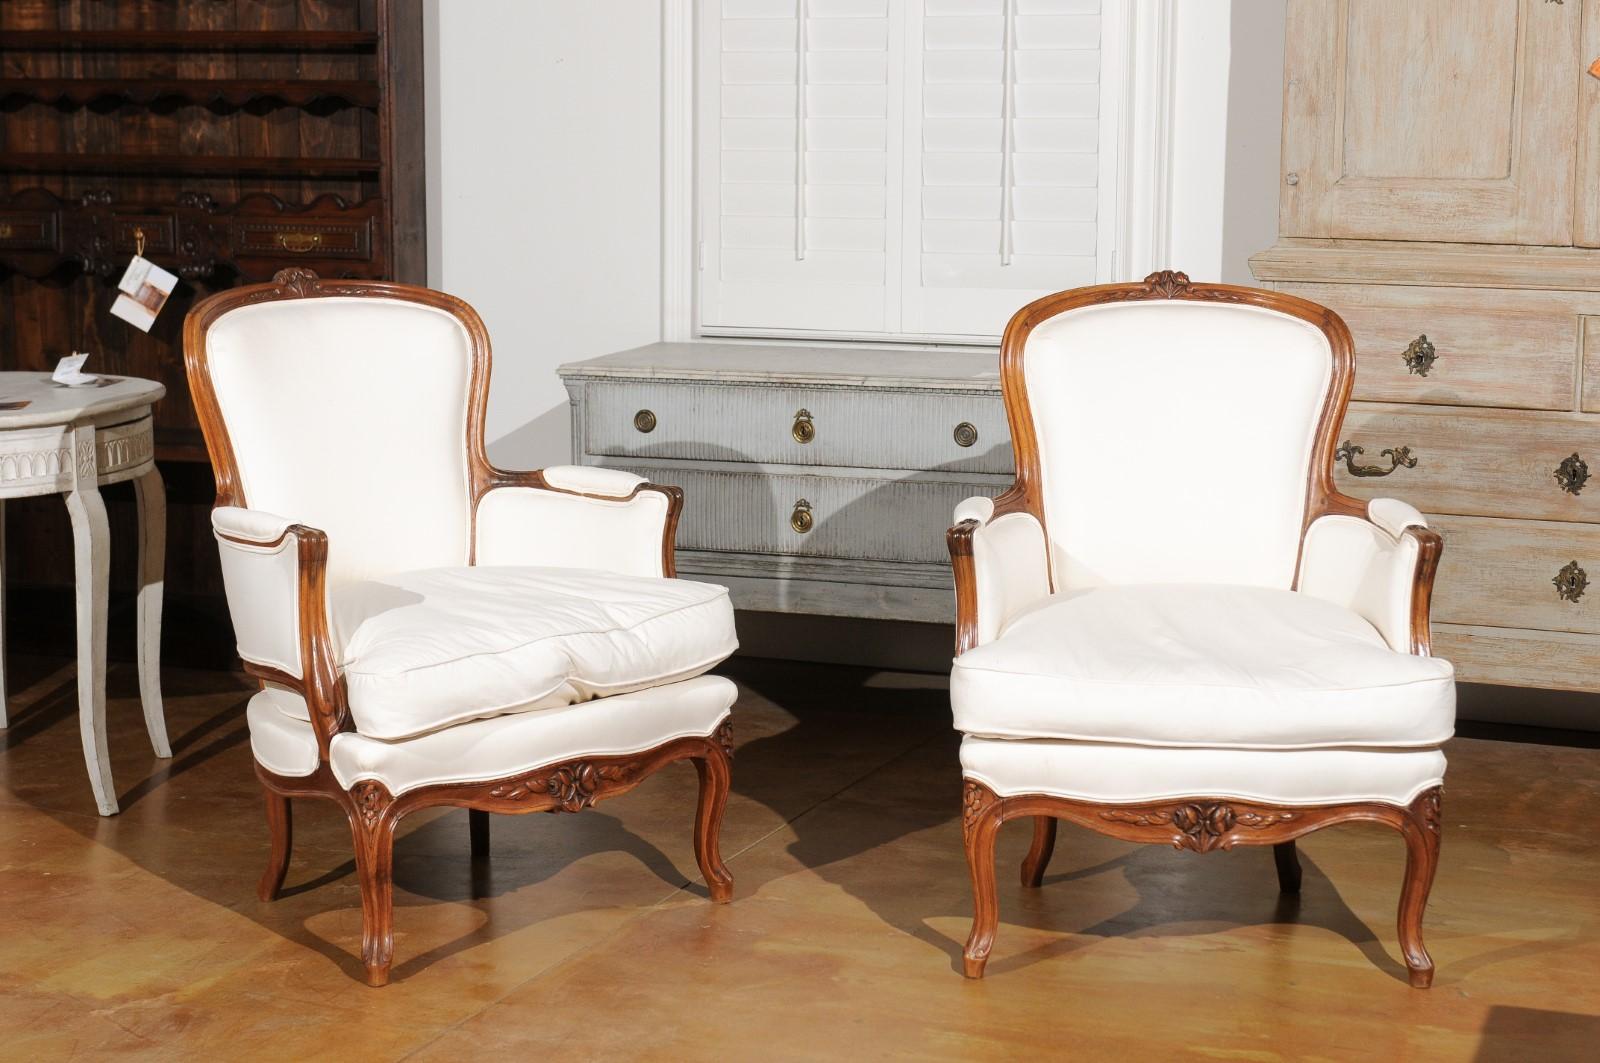 A pair of French Louis XV style walnut armchairs from the late 19th century, stamped and upholstered. Born in France during the later years of the 19th century, this pair of walnut armchairs presents the stylistic characteristics of the Louis XV